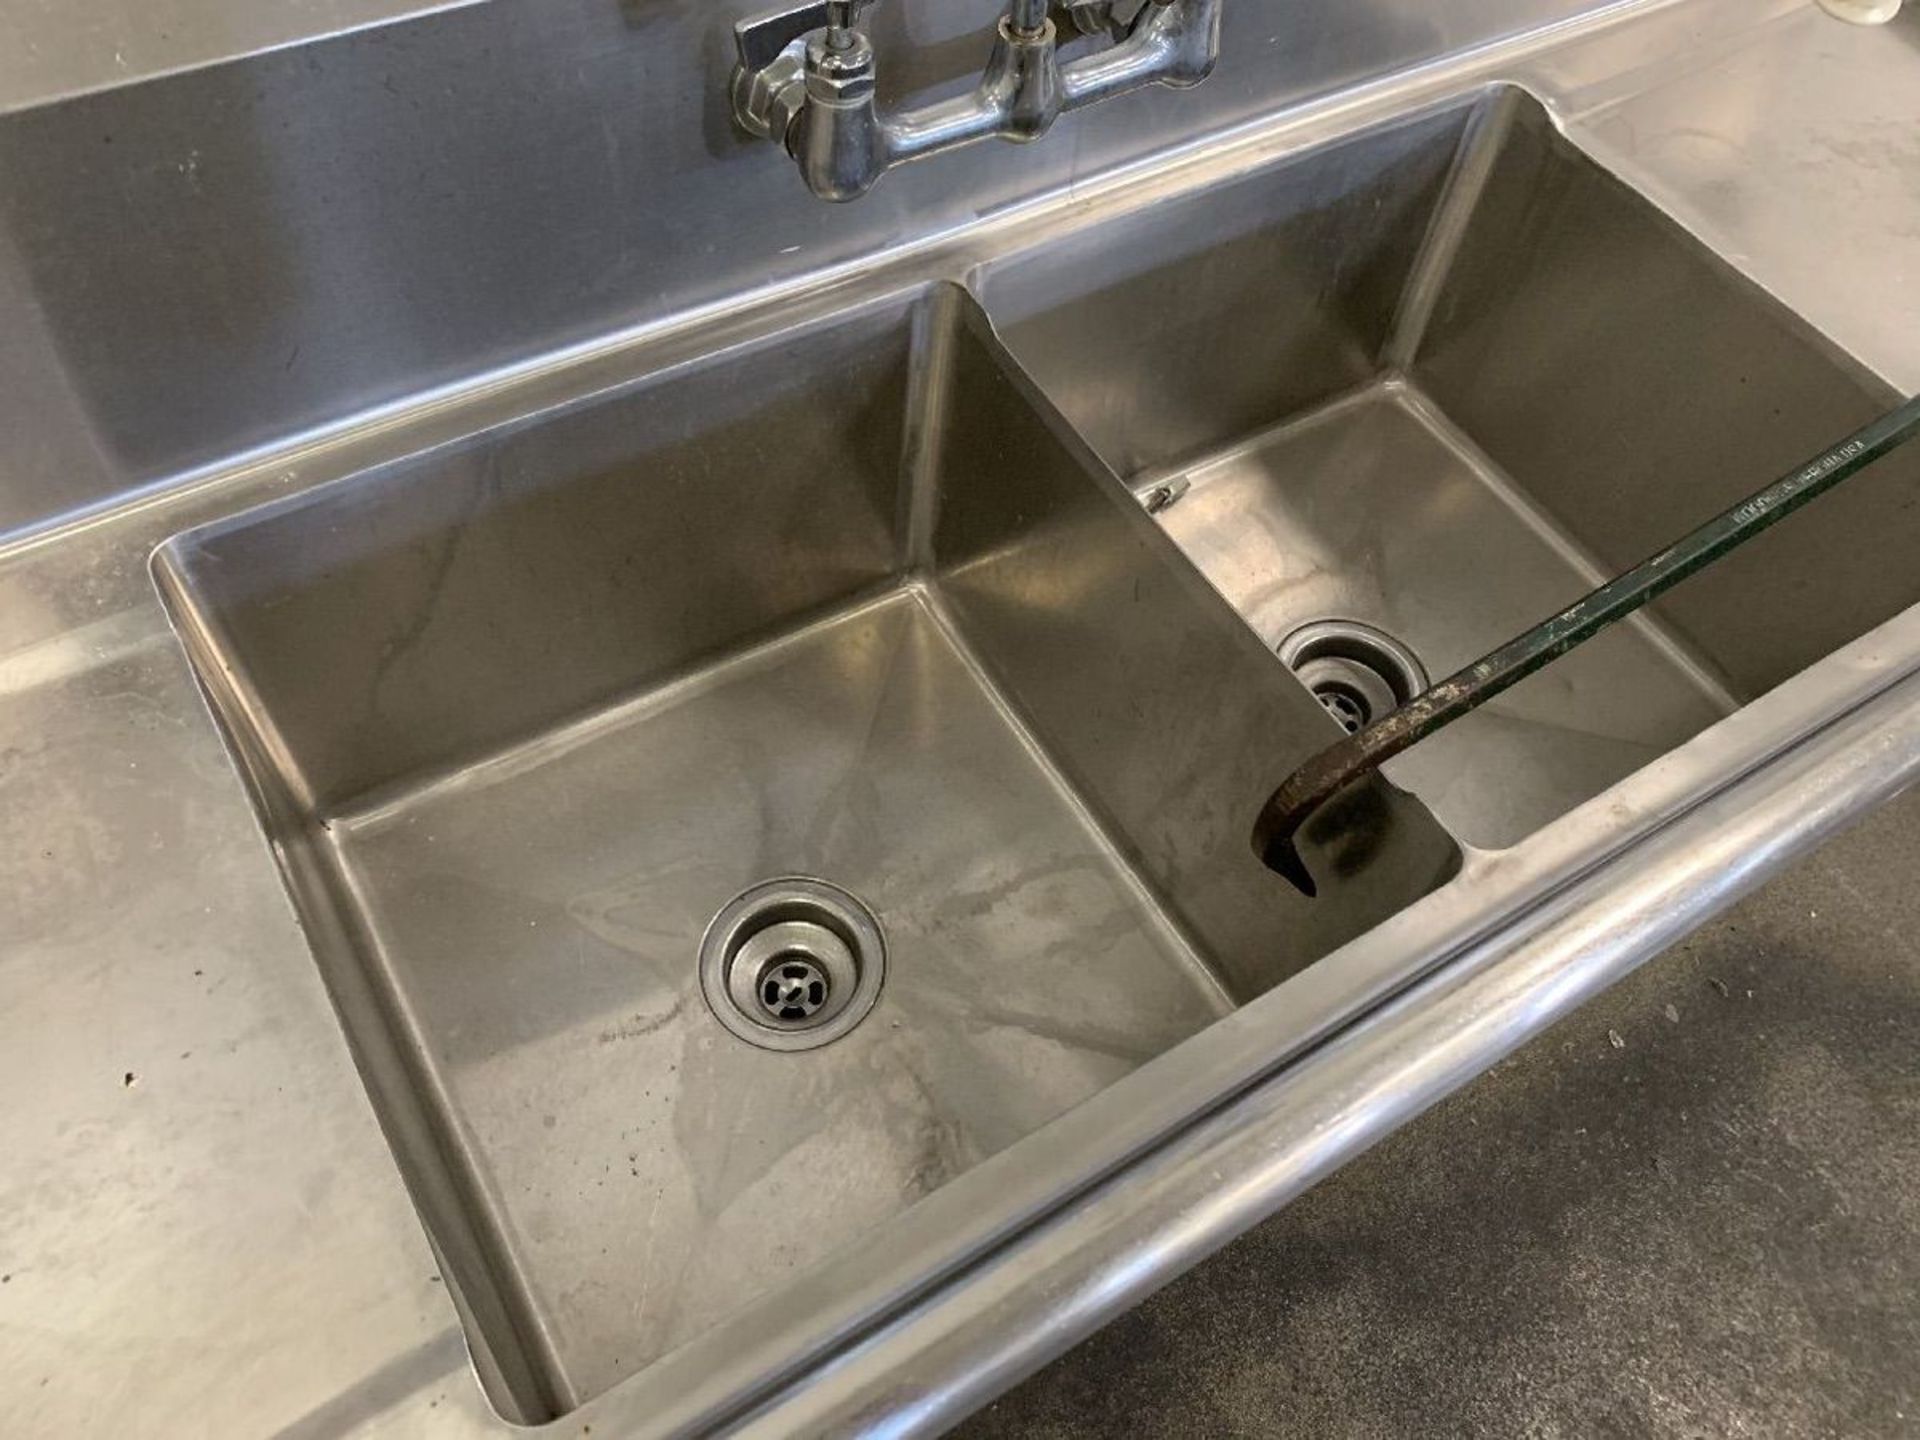 24" X 72" X 37" HIGH GREEN WORLD MODEL TSA-2-D1 STAINLESS STEEL TWO-BOWL SINK | Rig Fee: $100 - Image 3 of 4